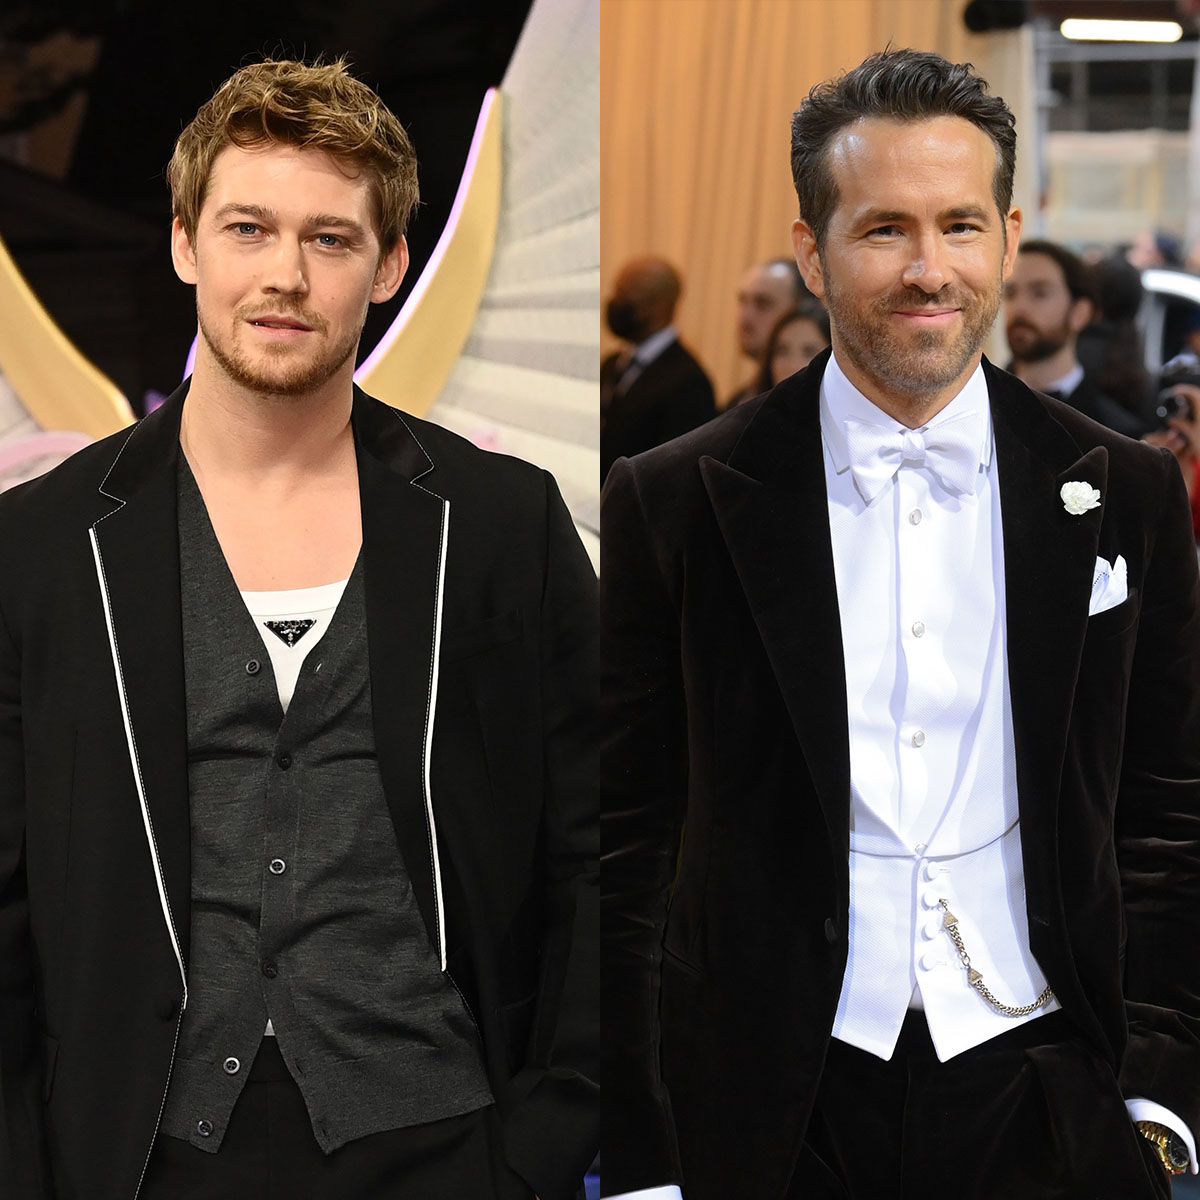 https://akns-images.eonline.com/eol_images/Entire_Site/2022828/rs_1200x1200-220928104357-1200--Joe_Alwyn_and_Ryan_Reynolds.jpg?fit=around%7C1200:1200&output-quality=90&crop=1200:1200;center,top